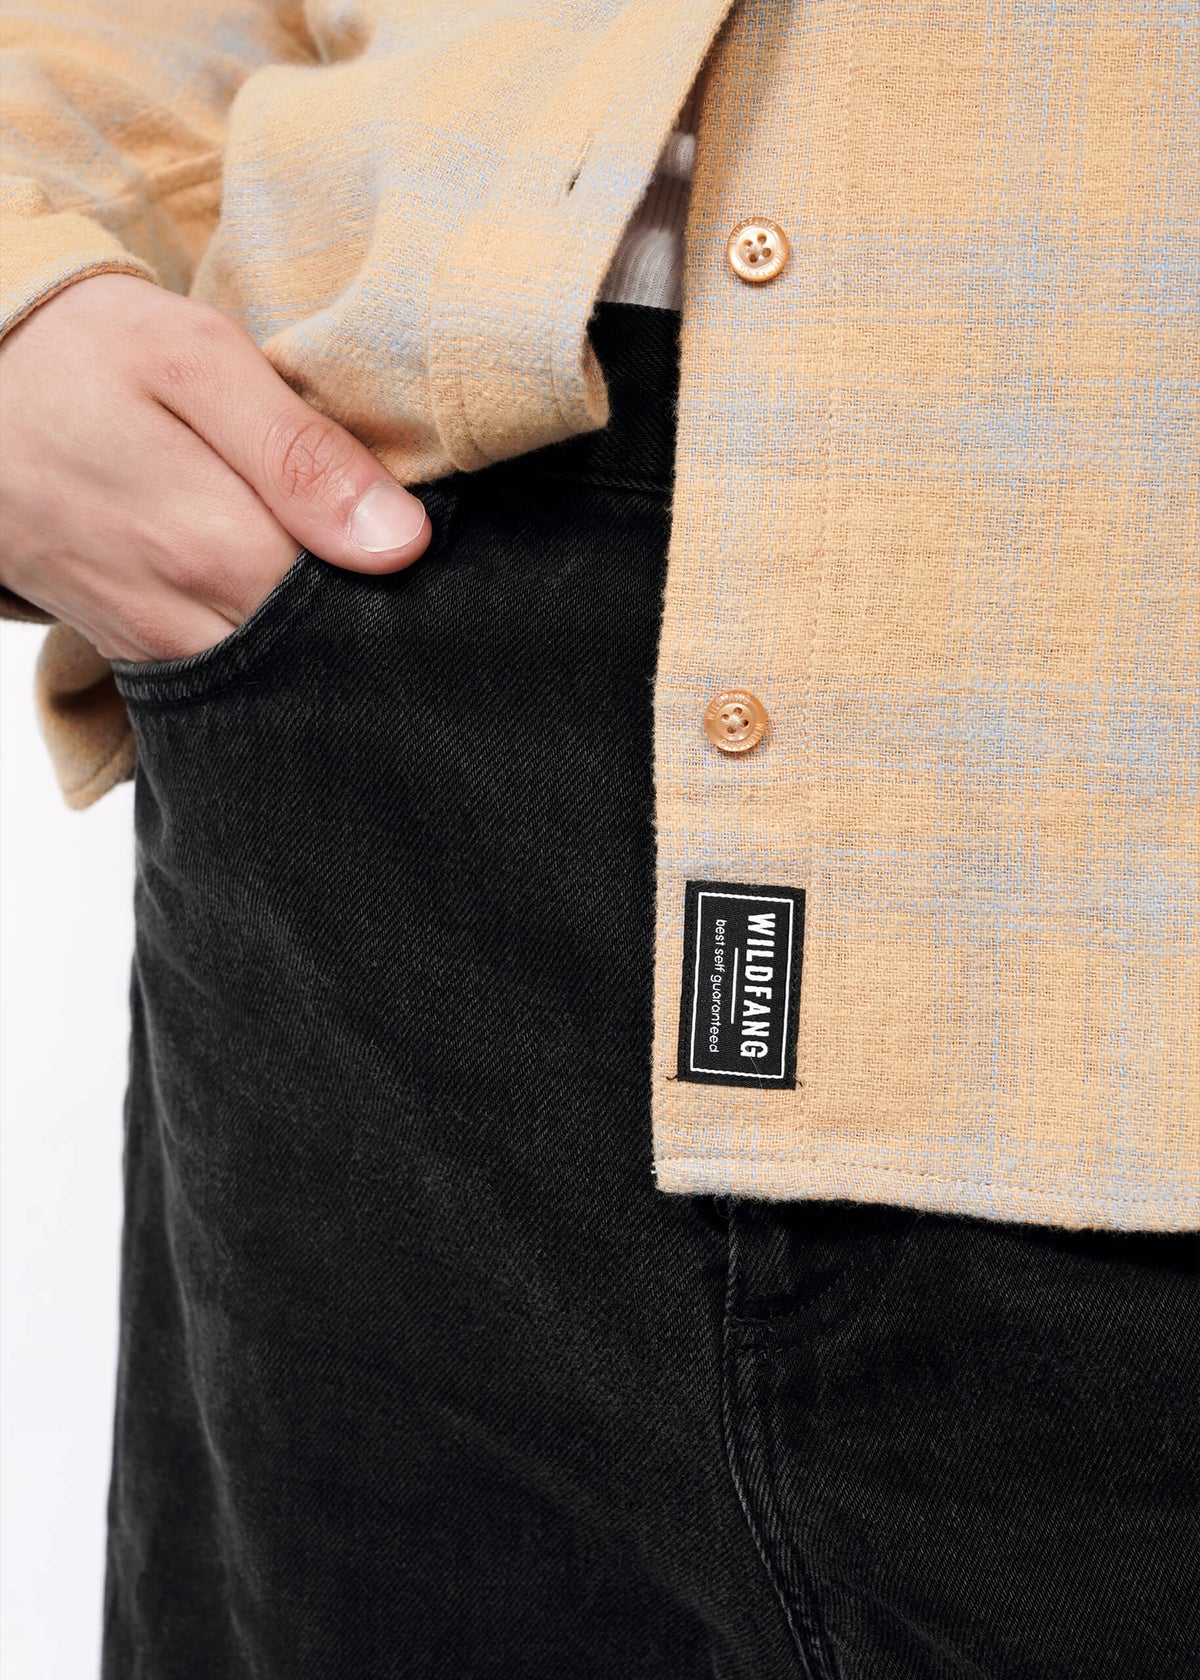 The Essential Flannel Long Sleeve Button Up